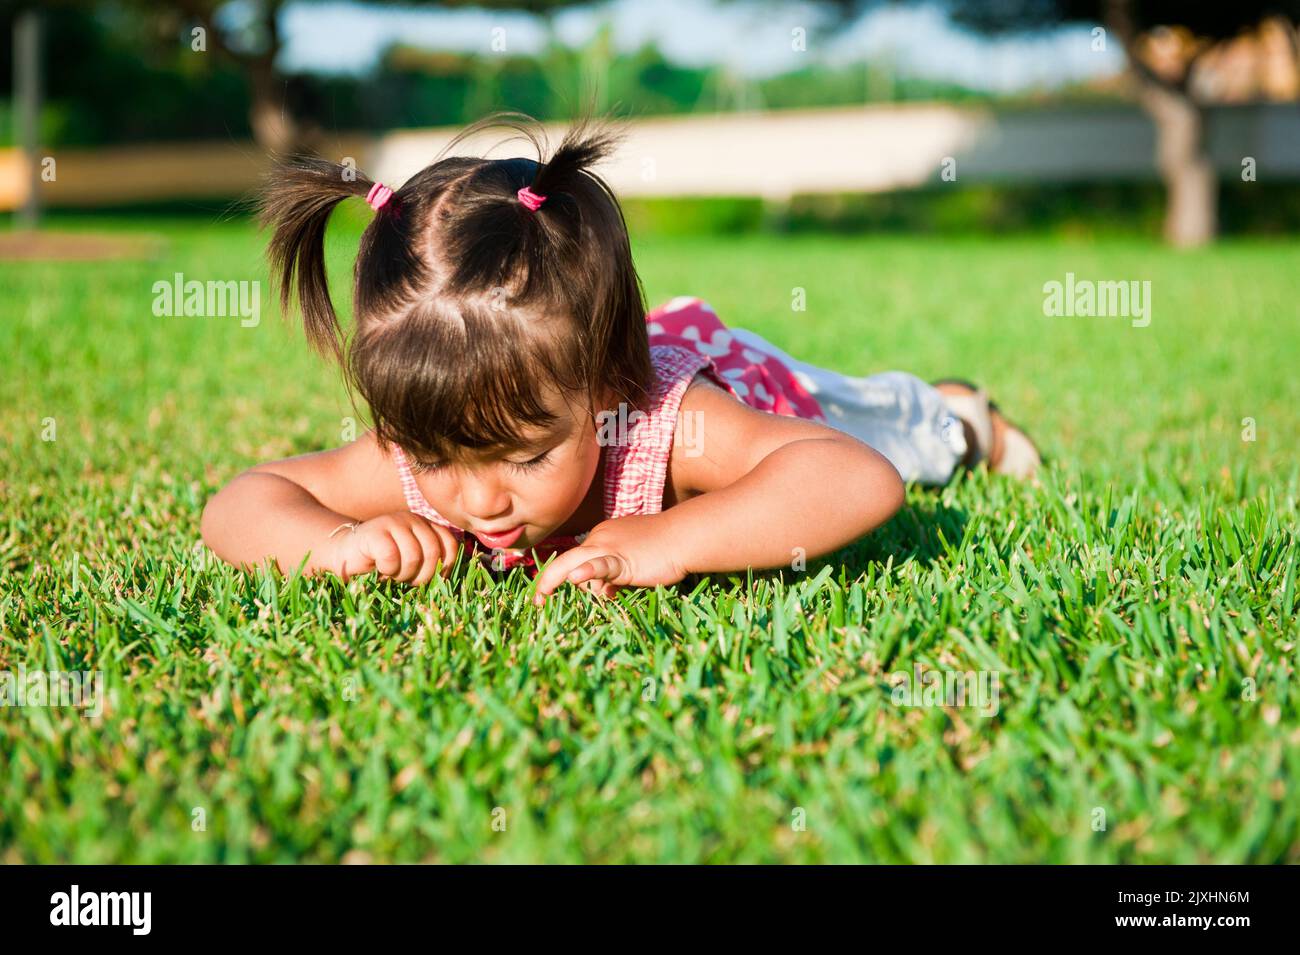 The girl searches in a grass of insects Stock Photo